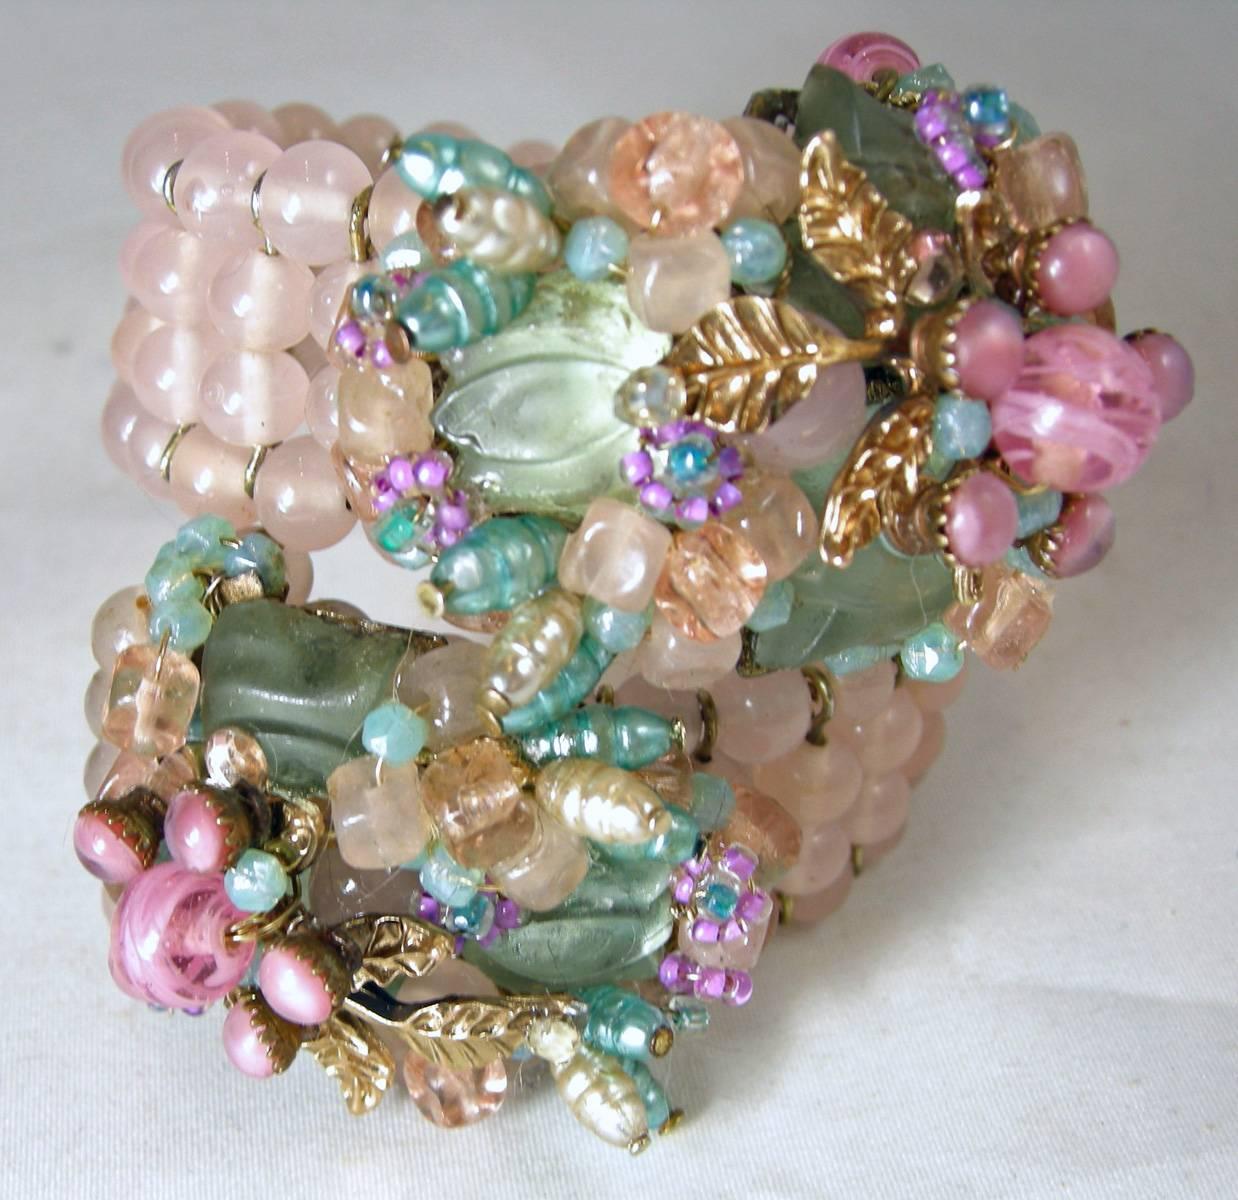 Whenever I come across one of these early Haskell bracelets, I can’t pass it up.  It is from the 1930s when Haskell did not sign … but just looking at it says “Haskell”.  It is wrap bracelet with soft pink glass with gold tone dividers in-between